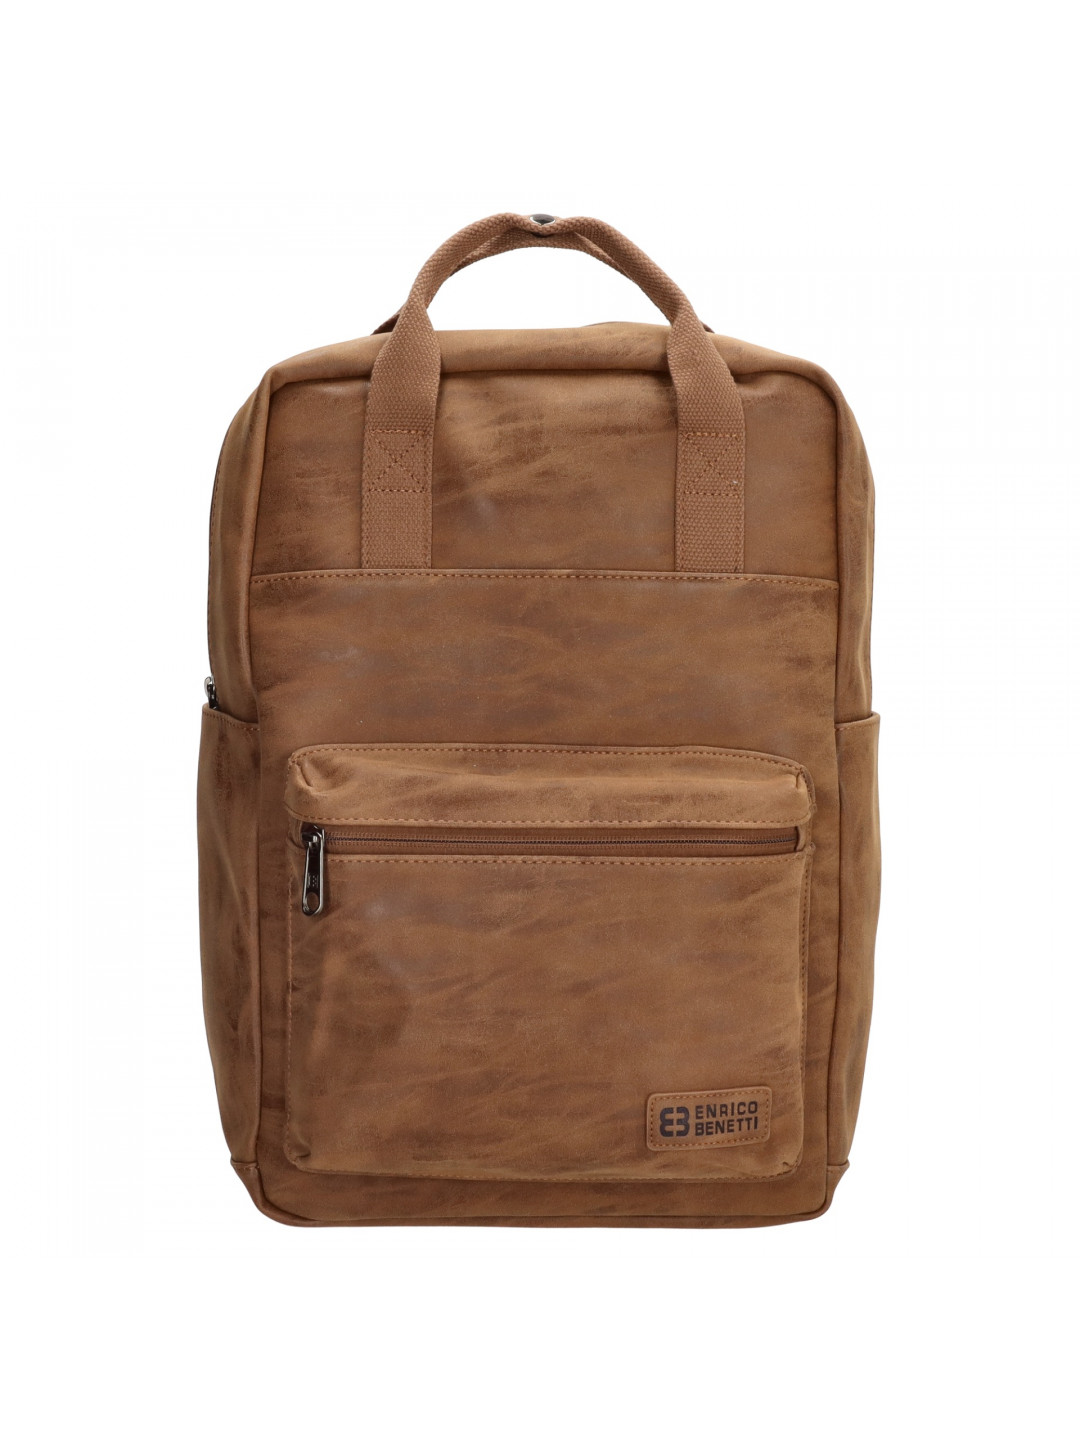 Enrico Benetti Rotterdam 13 quot Notebook Backpack Camel